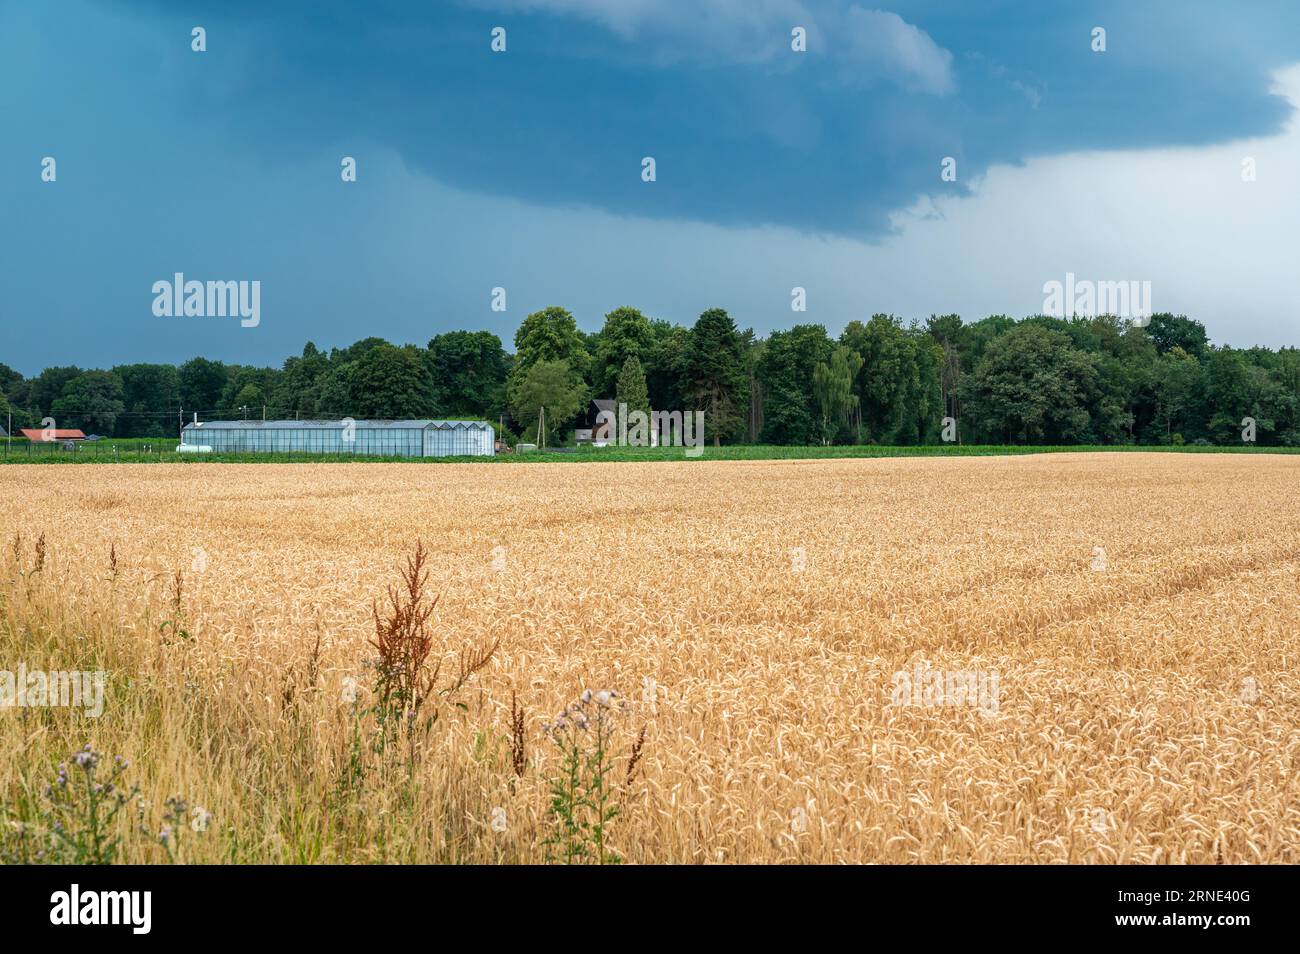 Golden agriculture fields of a farmland with dramatic cumulus clouds in the background, Geldern, North Rhine Westphalia, Germany Stock Photo